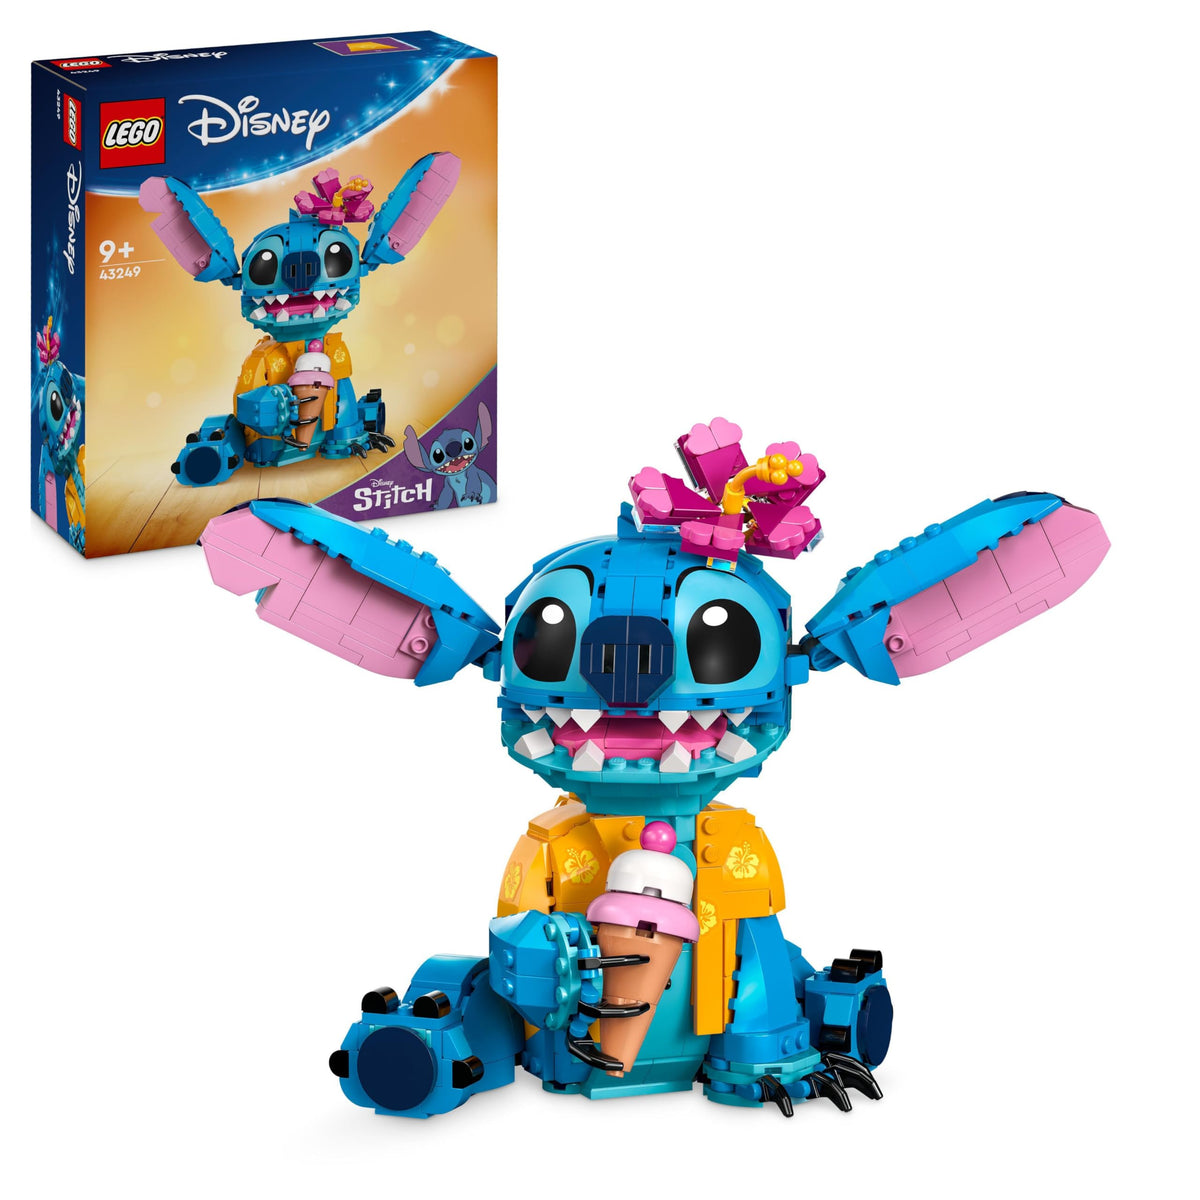 LEGO   Disney Stitch Building Toy for 9 Plus Year Old Kids, Girls & Boys, Playset with Ice-Cream Cone and Character Figure, Fun Birthday Gift 43249